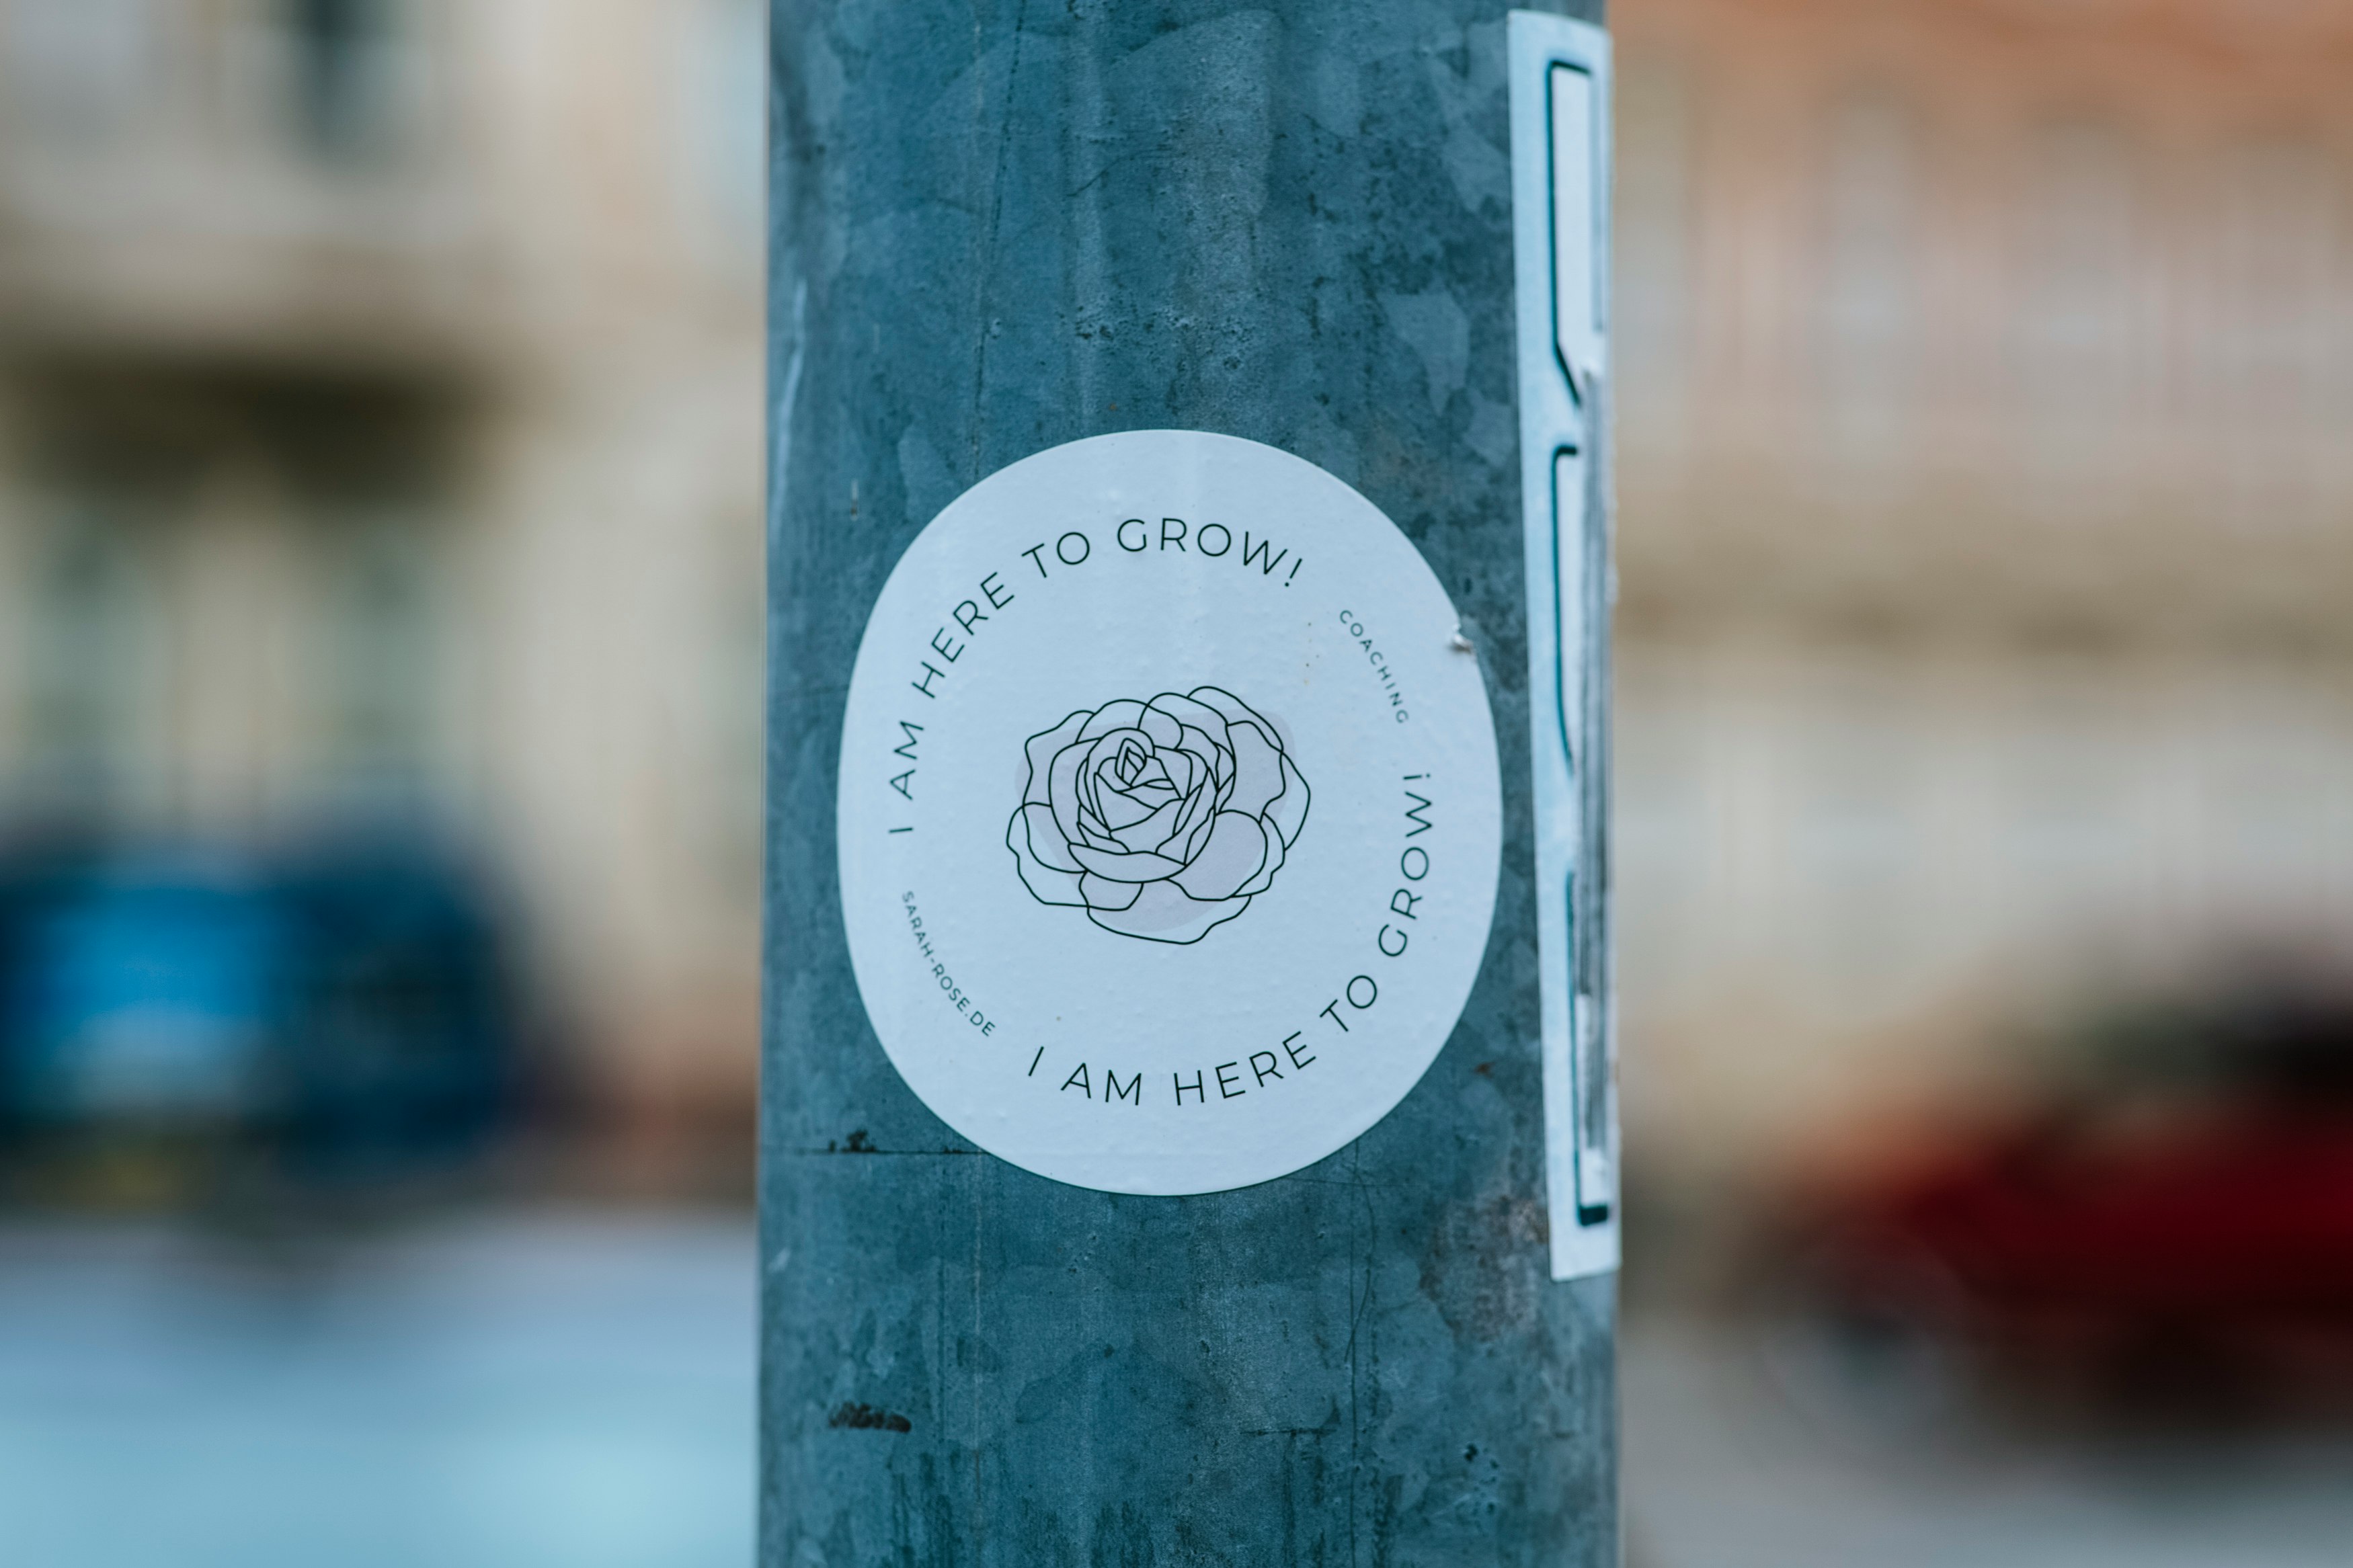 IAM HERE TO GROW. Activist protest sticker for mental coaching wokeness and mental healthy.